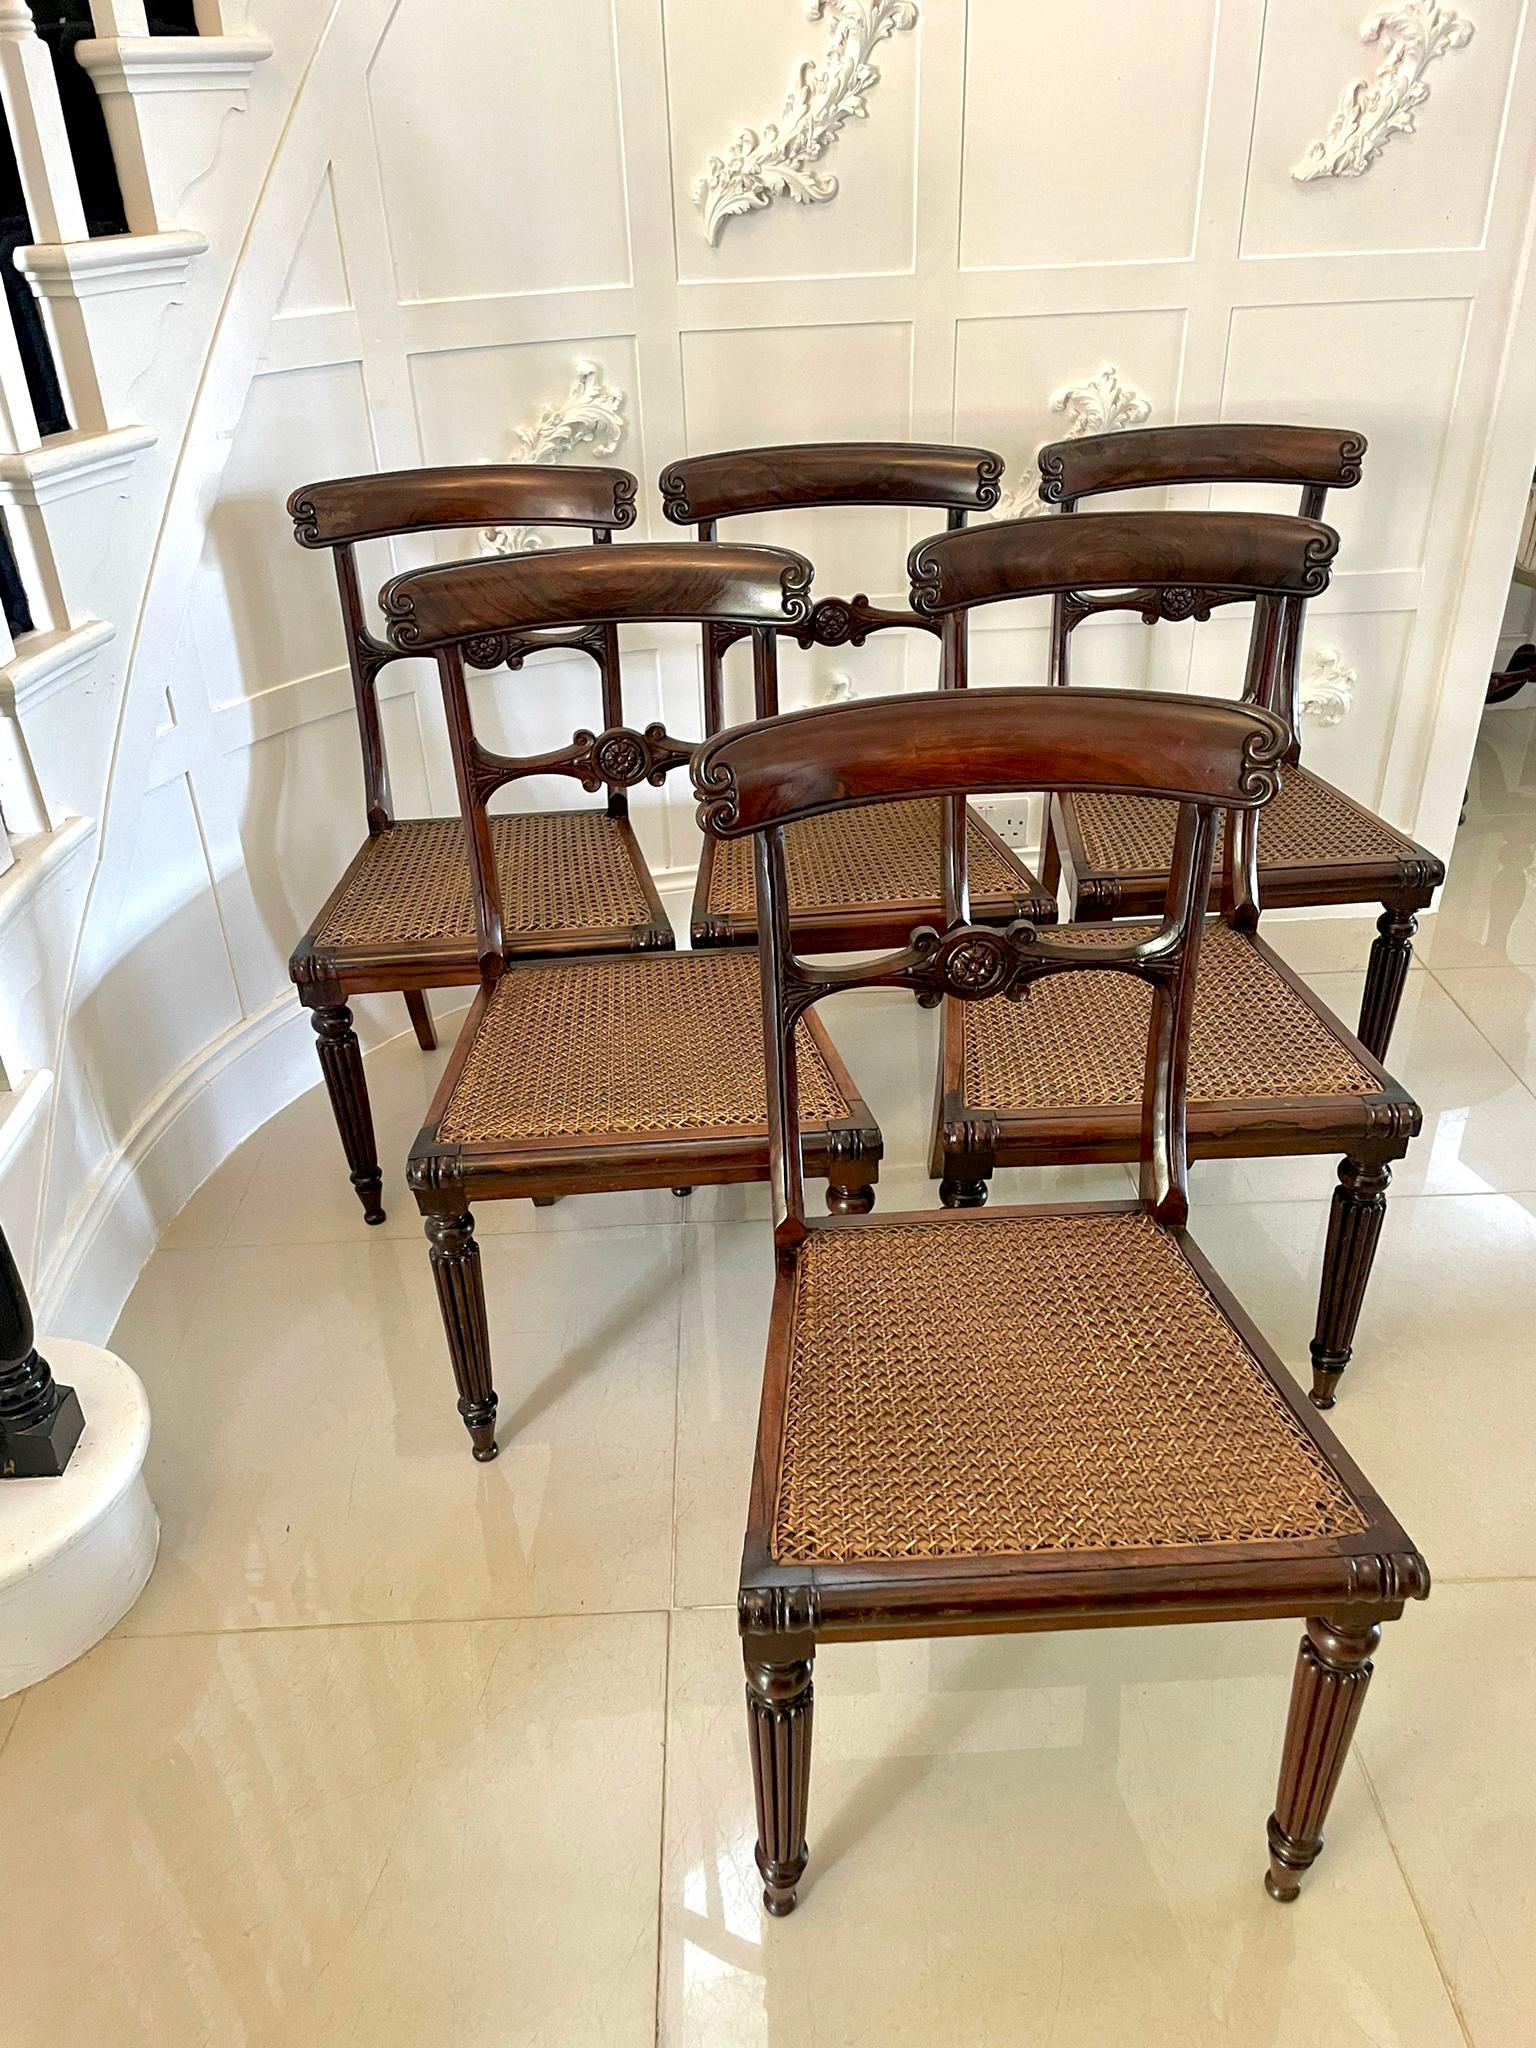 Quality set of six William IV rosewood dining chairs with an elegant carved shaped top rail, carved centre rail, cane seats standing on turned reeded legs to the front and out swept back legs

An elegant superior set in lovely original condition